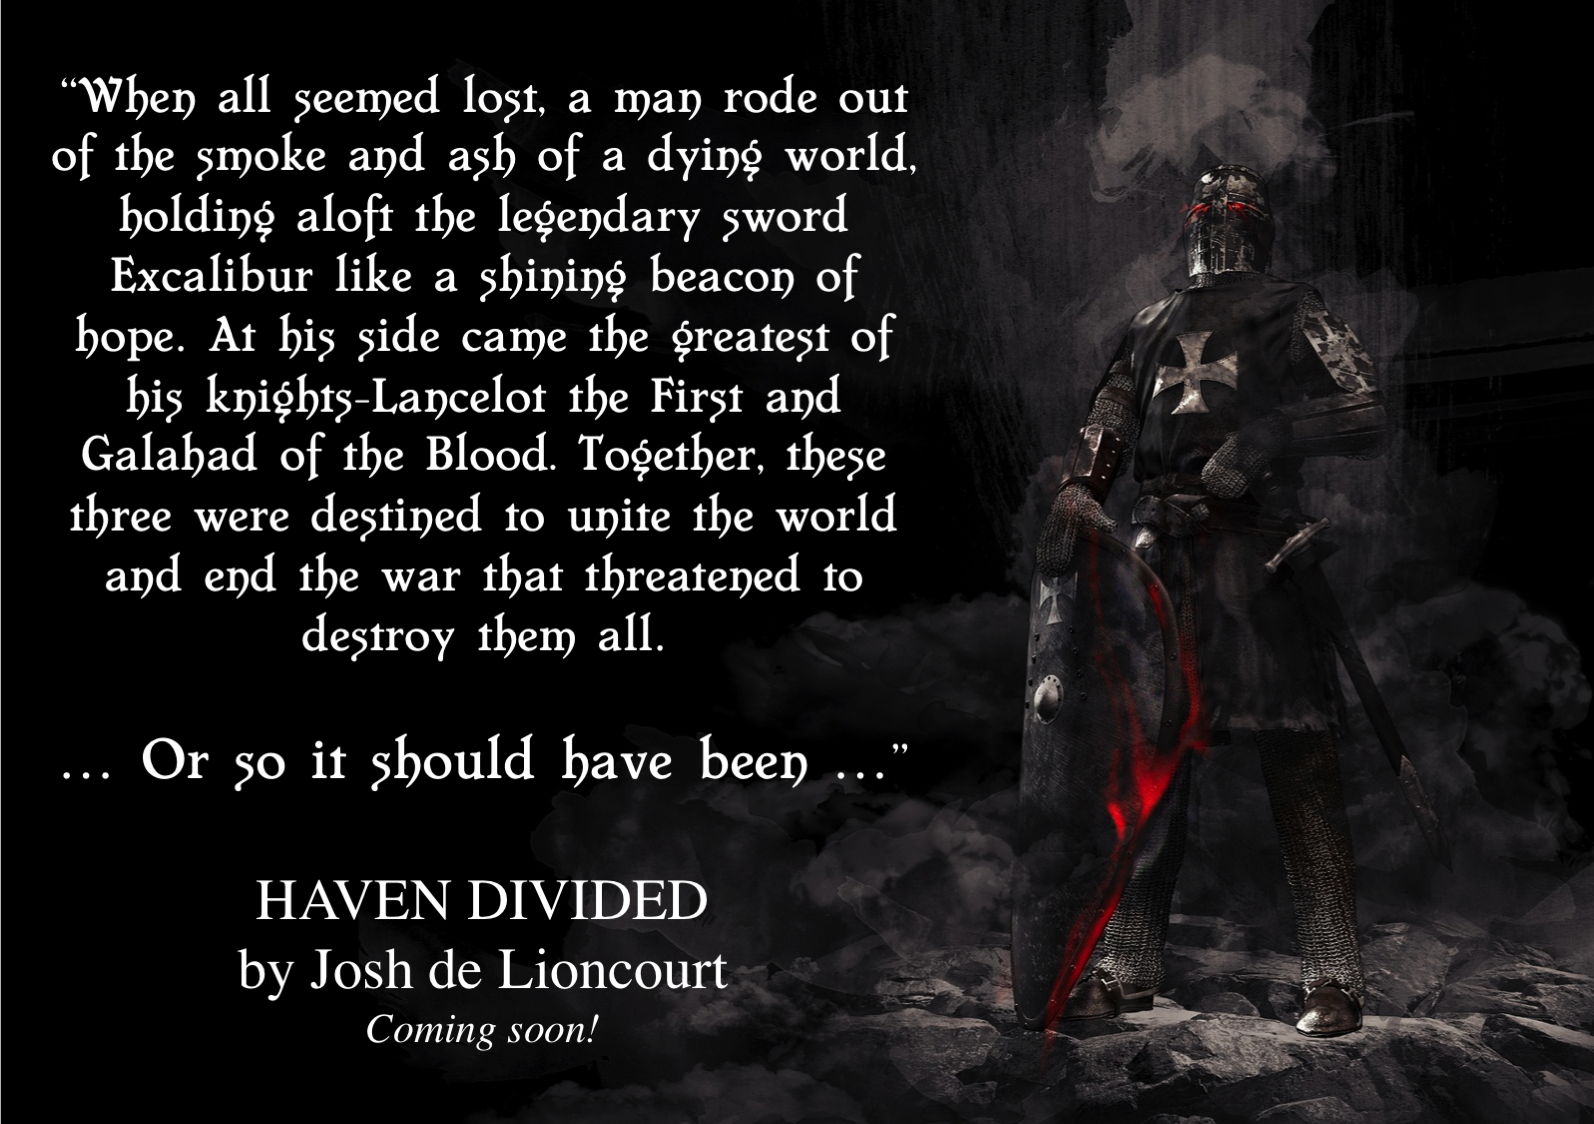 When all seemed lost, a man rode out of the smoke and ash of a dying world, holding aloft the legendary sword Excalibur like a shining beacon of hope. At his side came the greatest of his knights—Lancelot the First and Galahad of the Blood. Together, these three were destined to unite the world and end the war that threatened to destroy them all ... Or so it should have been ...